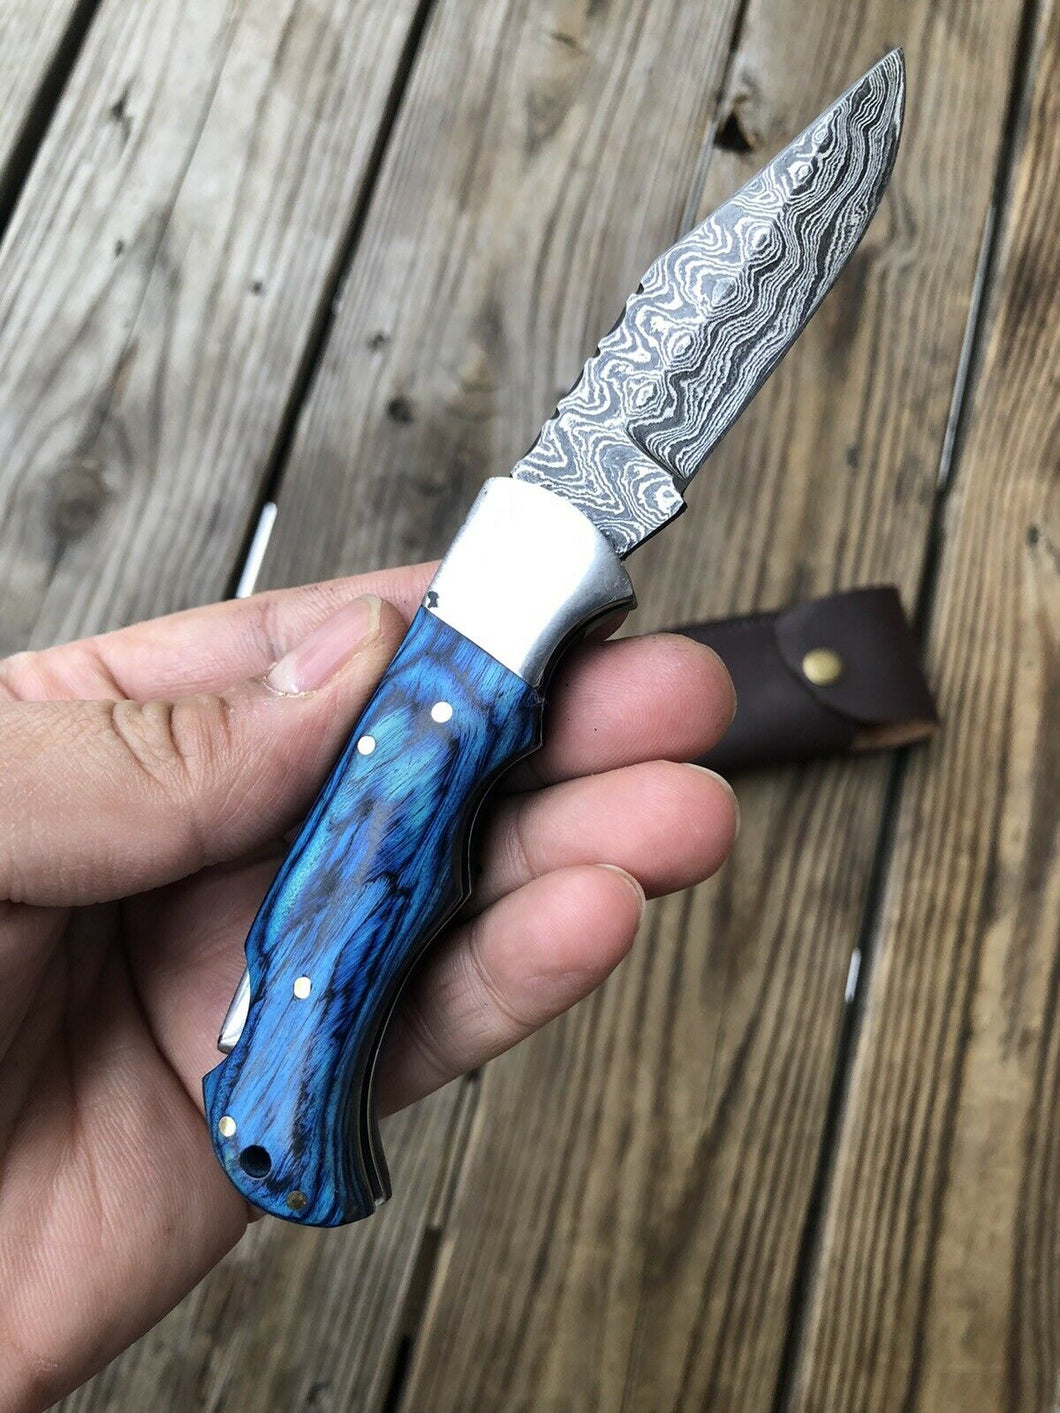 HAND FORGED DAMASCUS STEEL BackLock Folding Knife W/Stained Wood & Steel Handle - SUSA KNIVES